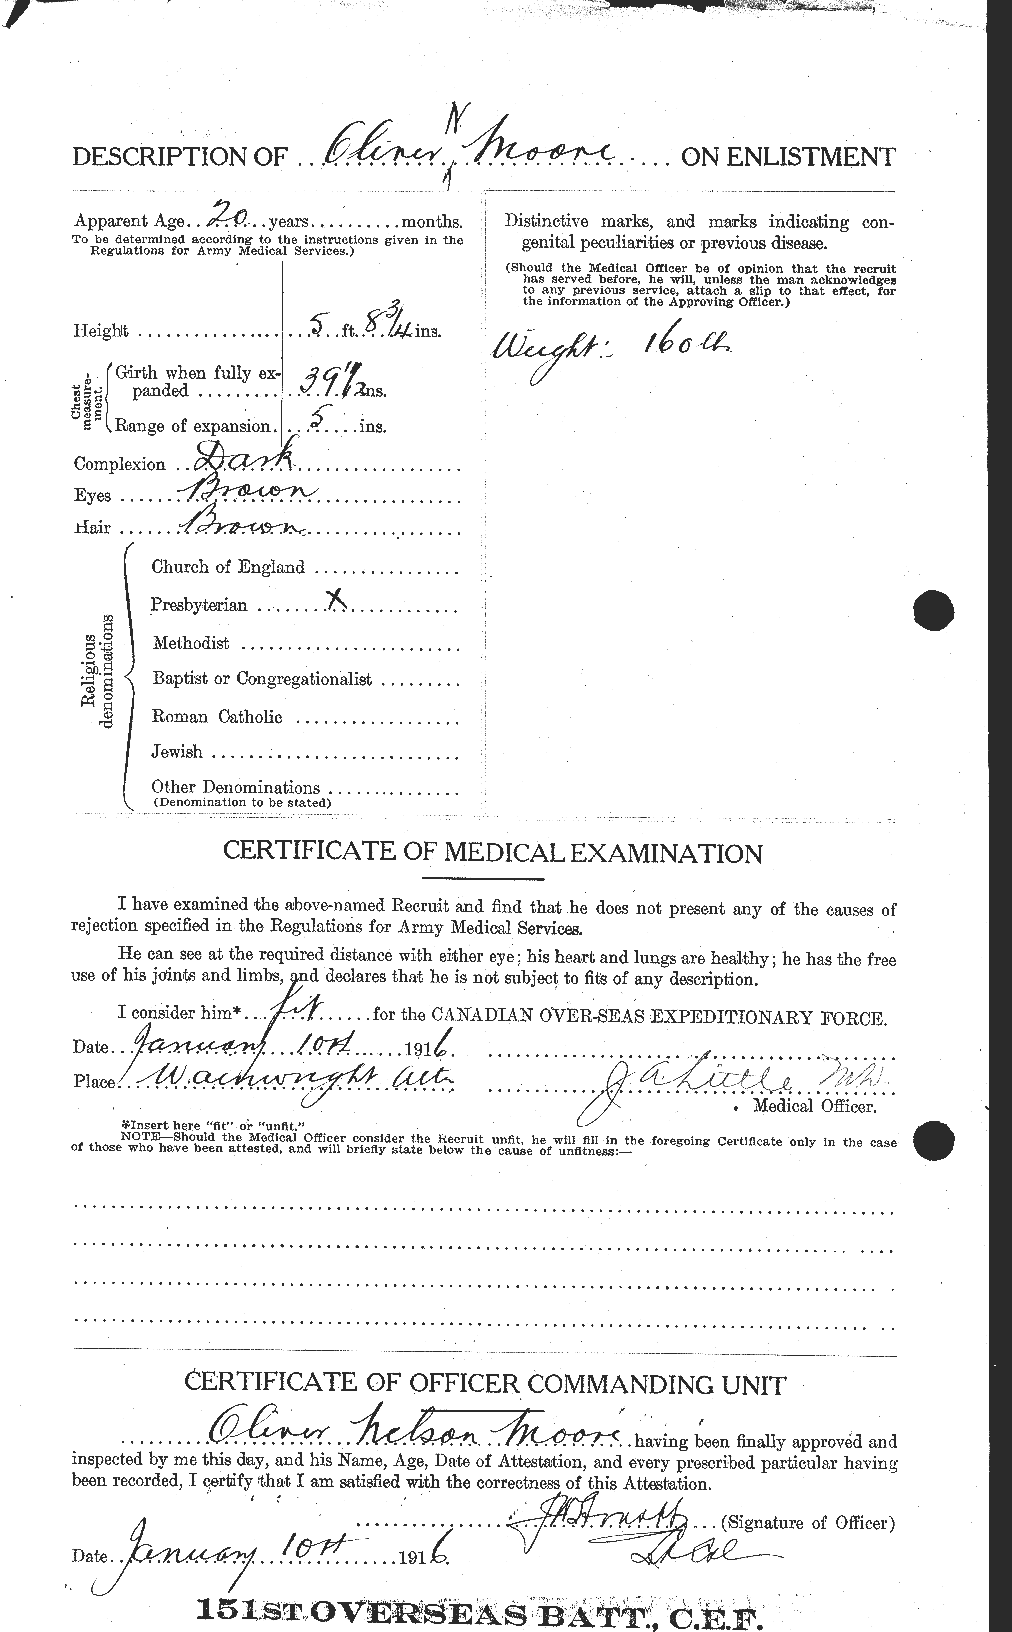 Personnel Records of the First World War - CEF 503467b